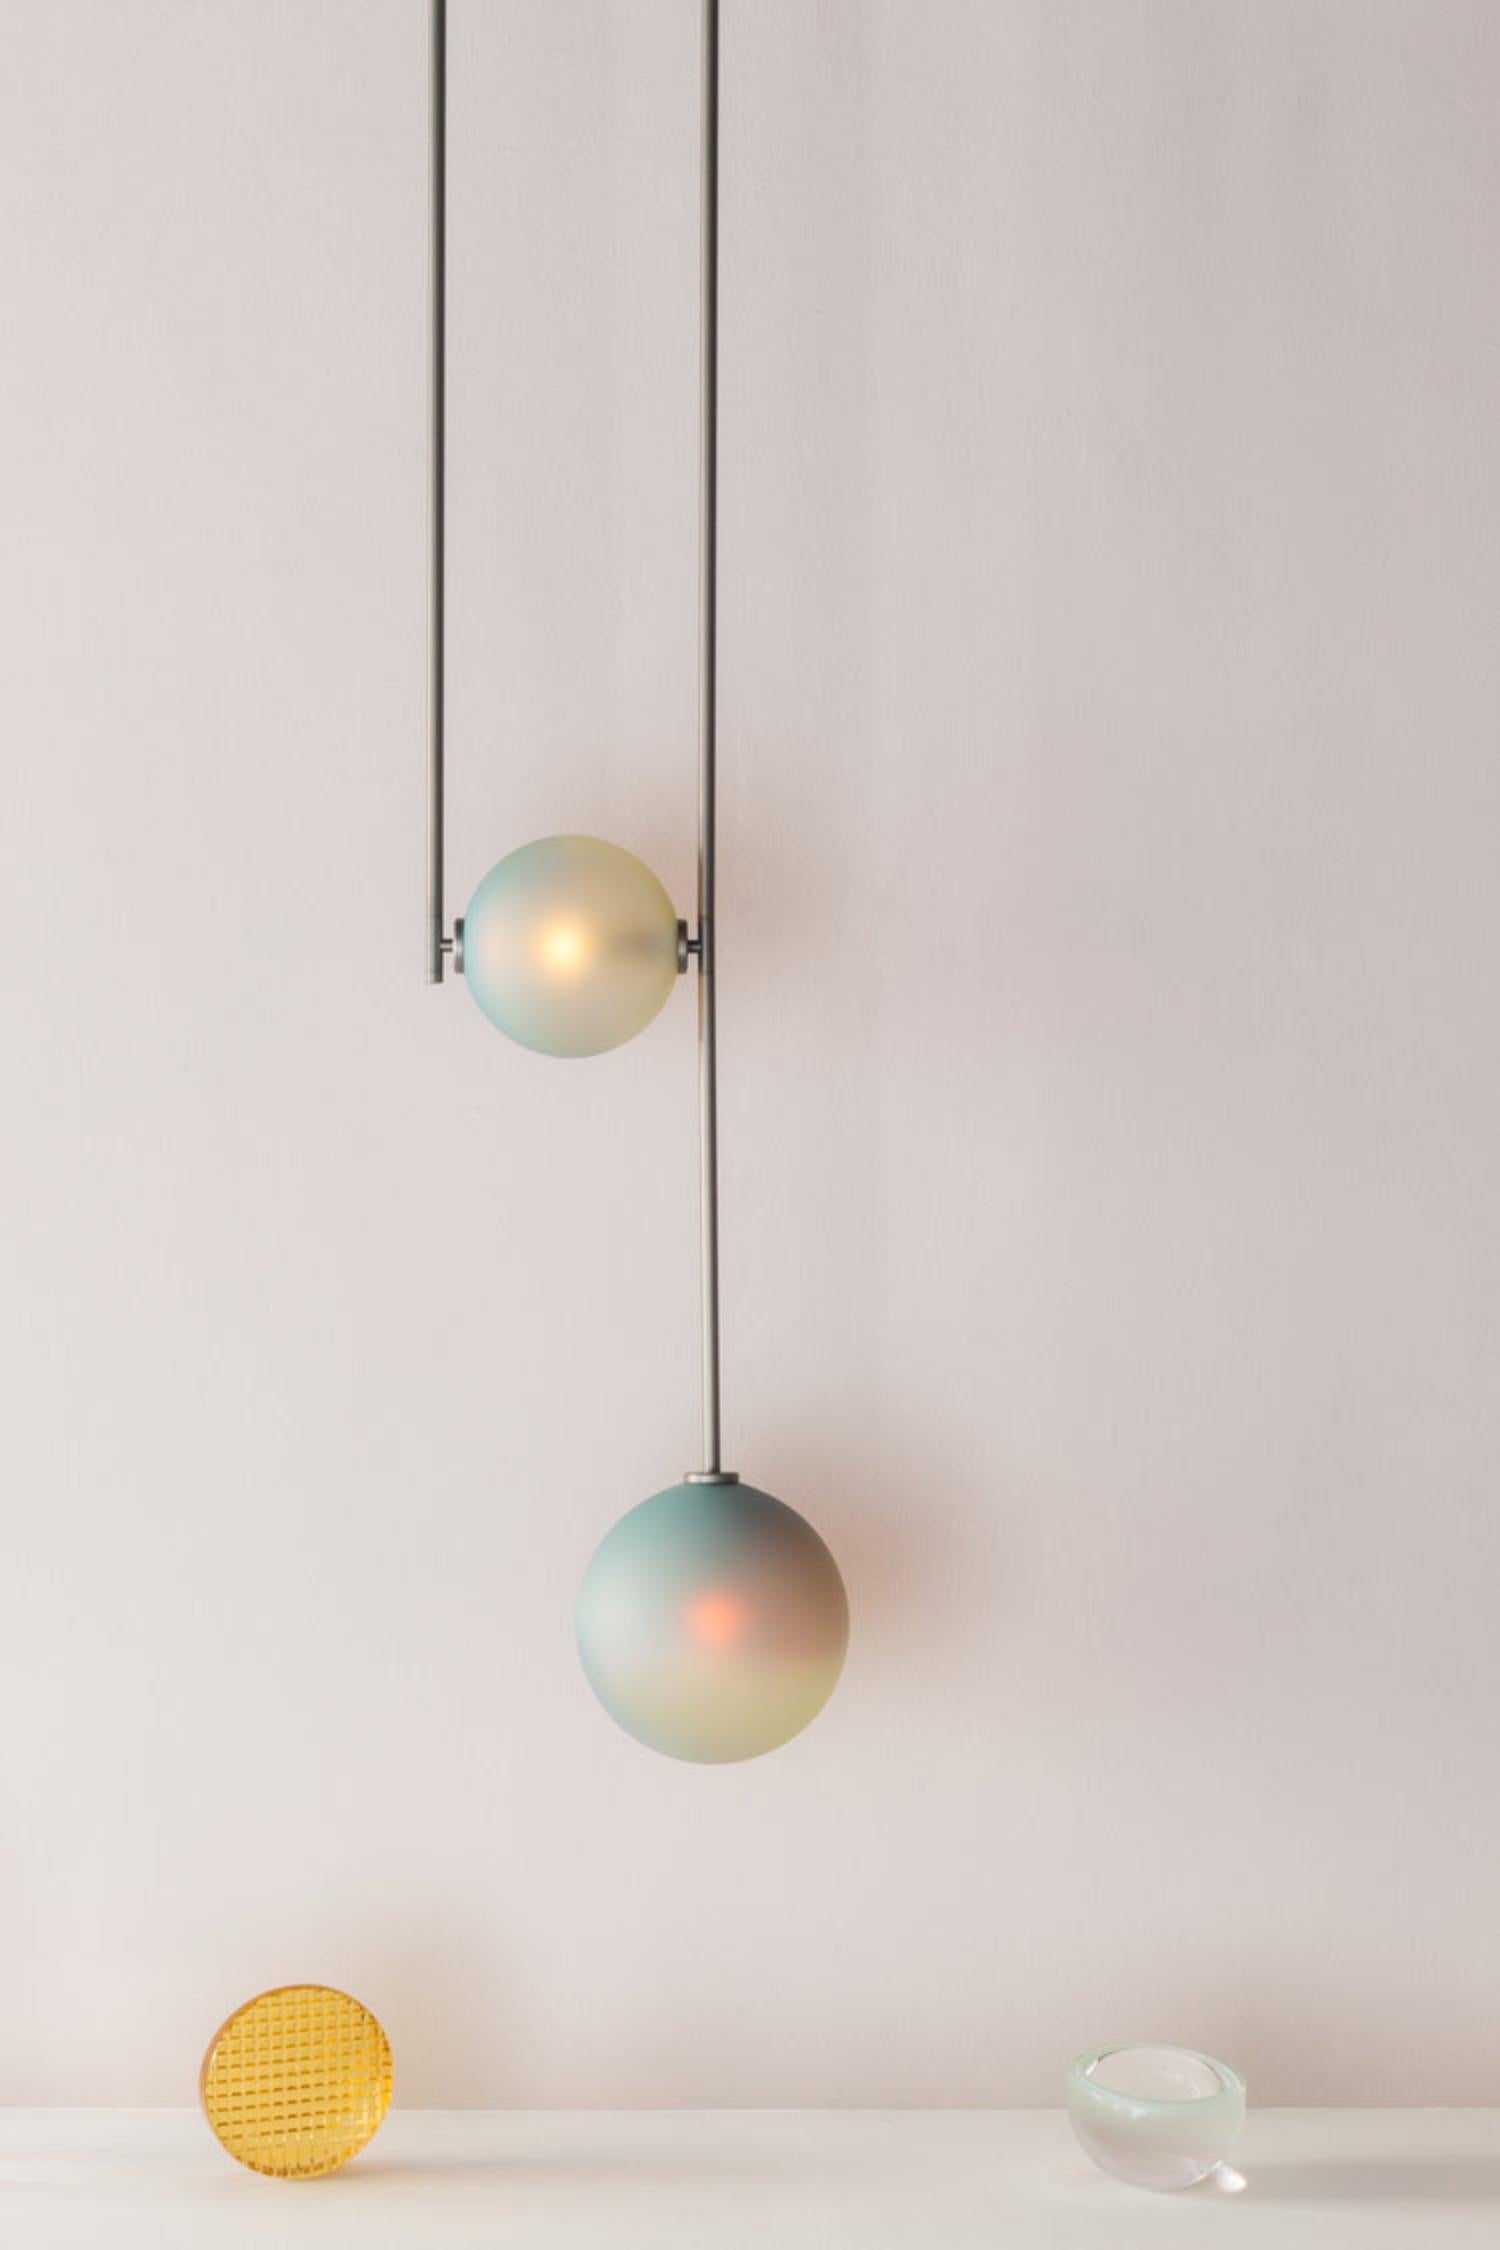 Equalizer chameleon globe pendant light by Ladies & Gentlemen Studio.
Dimensions: height variable, 12” round canopy.
Materials: copper, brass, wire, cord.
Finishes: black anodize / bronze.
anodize / olive anodize.
glass: cream / smokey green /